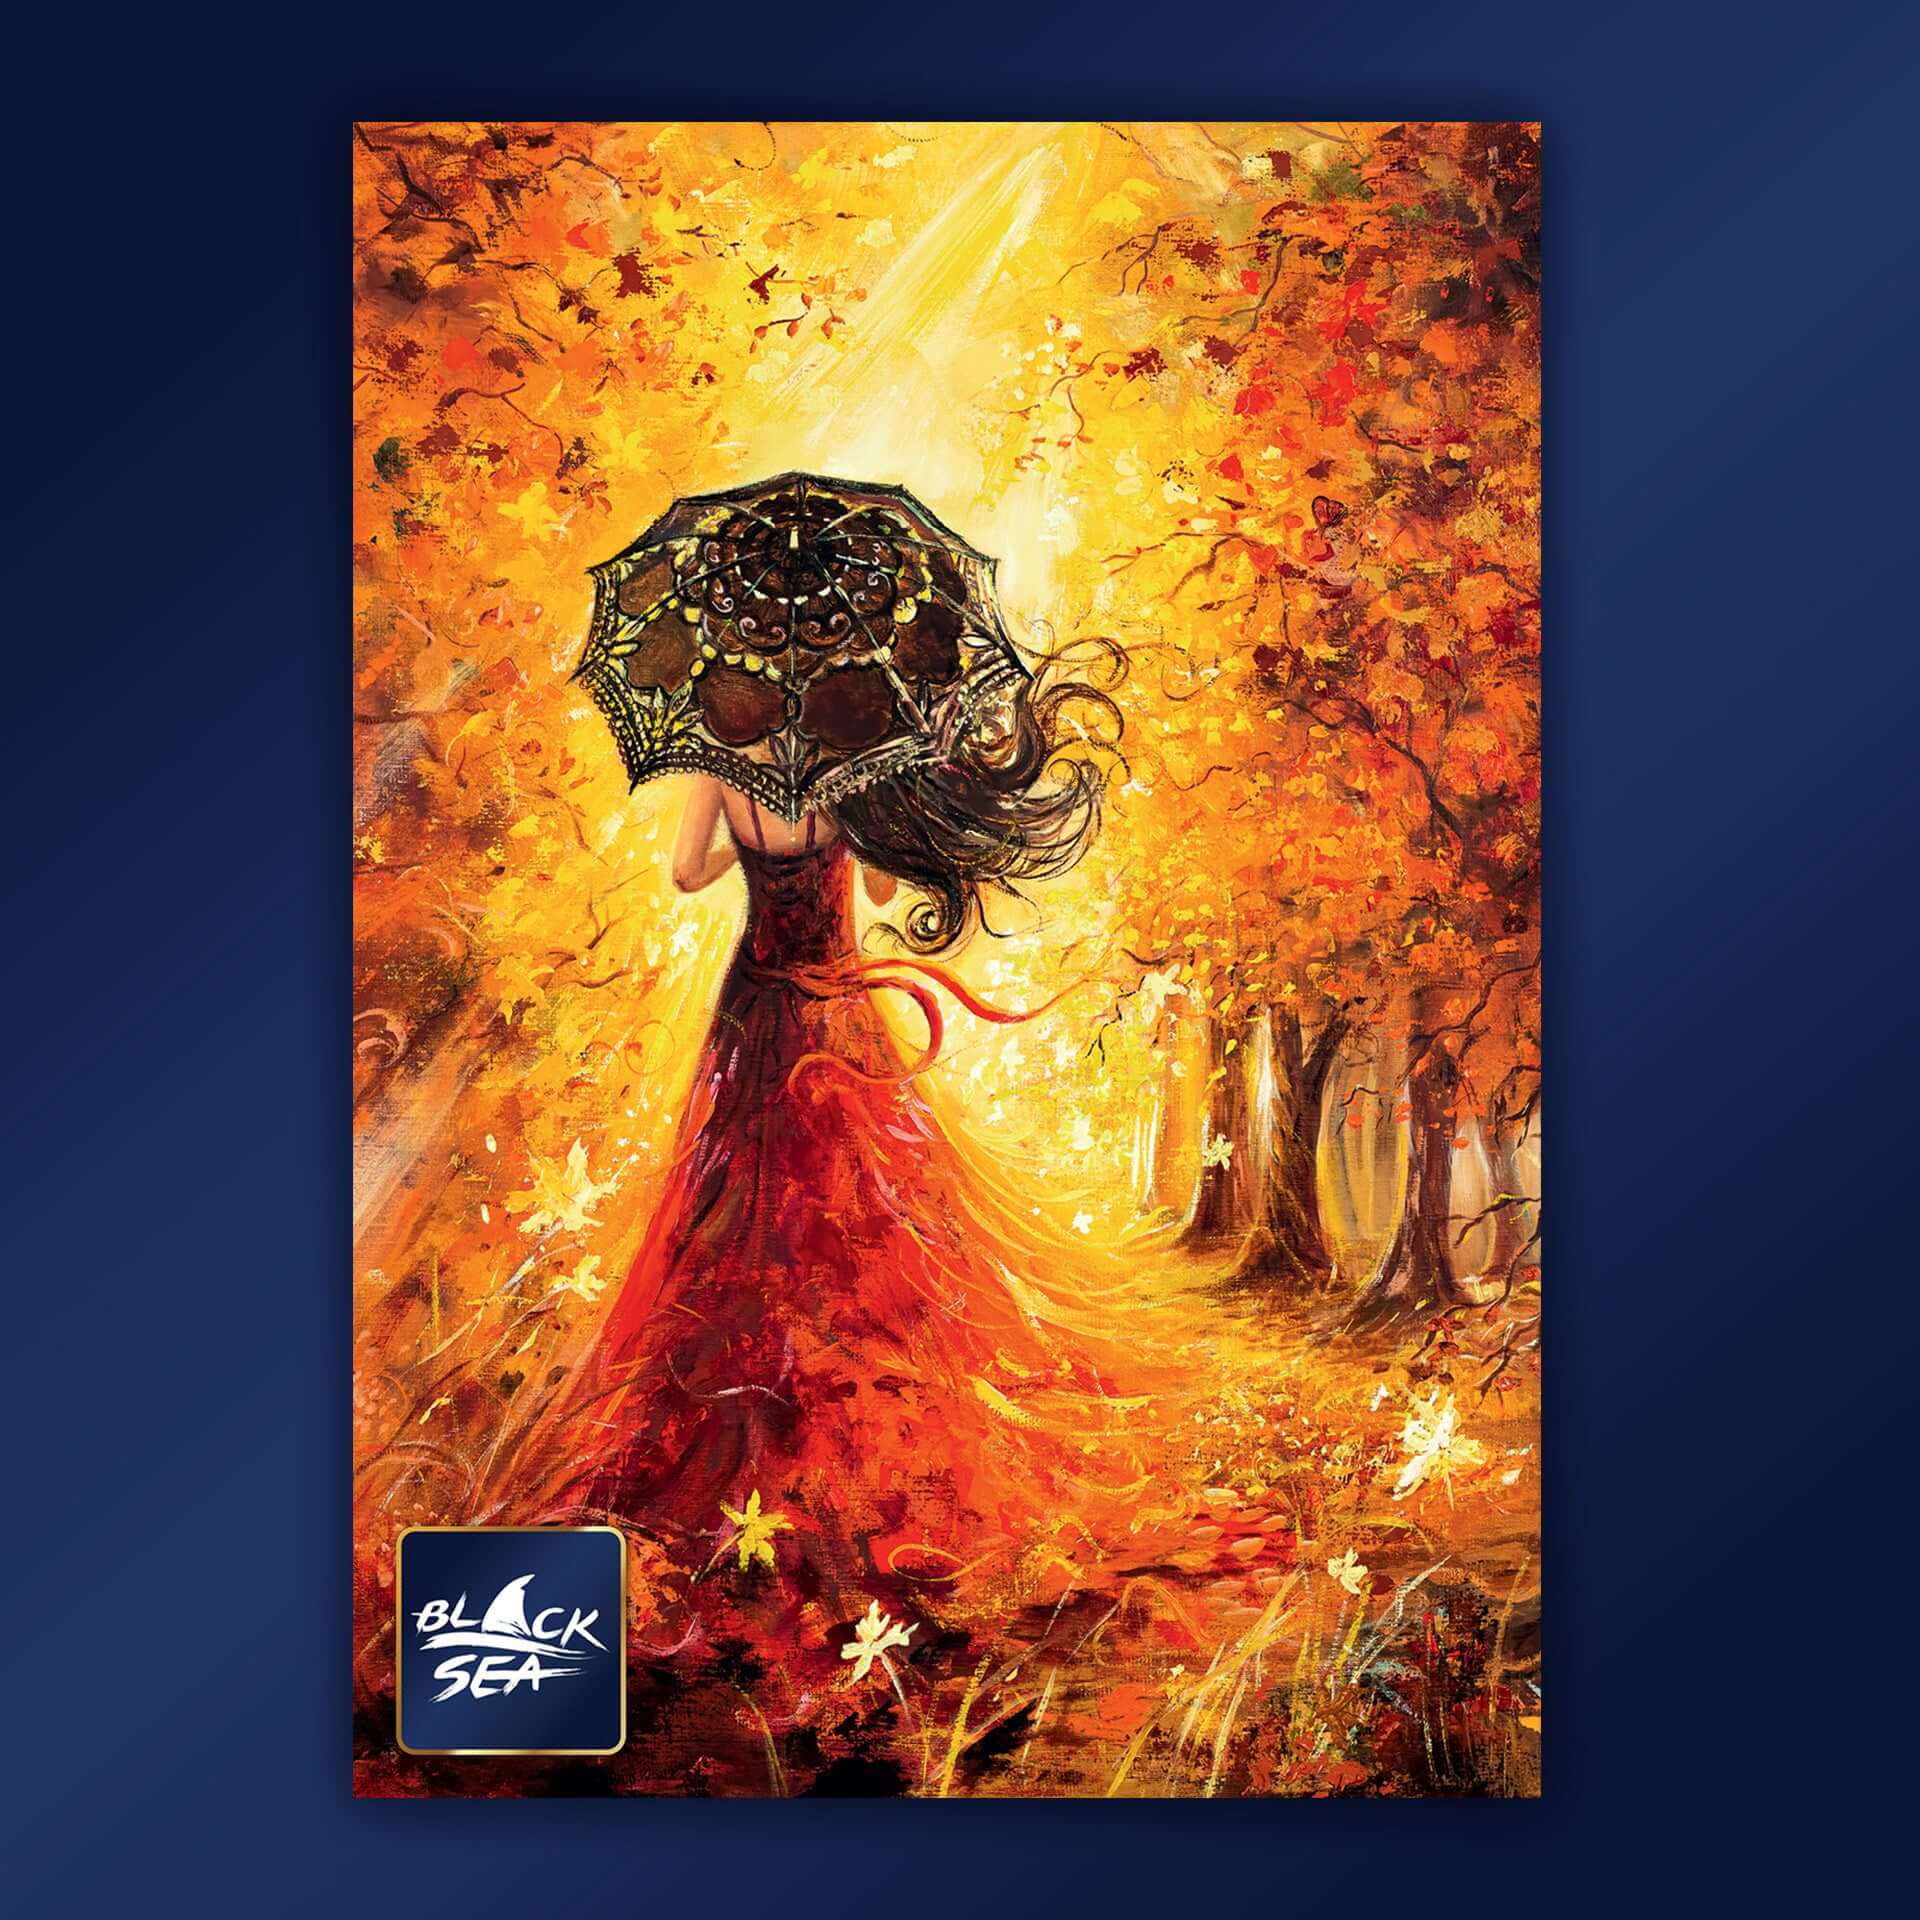 Puzzle Black Sea 1000 pieces - Indian Summer, The sun still warms up the land, and the beautiful dress of autumn makes it lovelier than ever. Red, yellow, orange – the colours of nature abound and turn the world into a fairy-tale that you cannot stop read